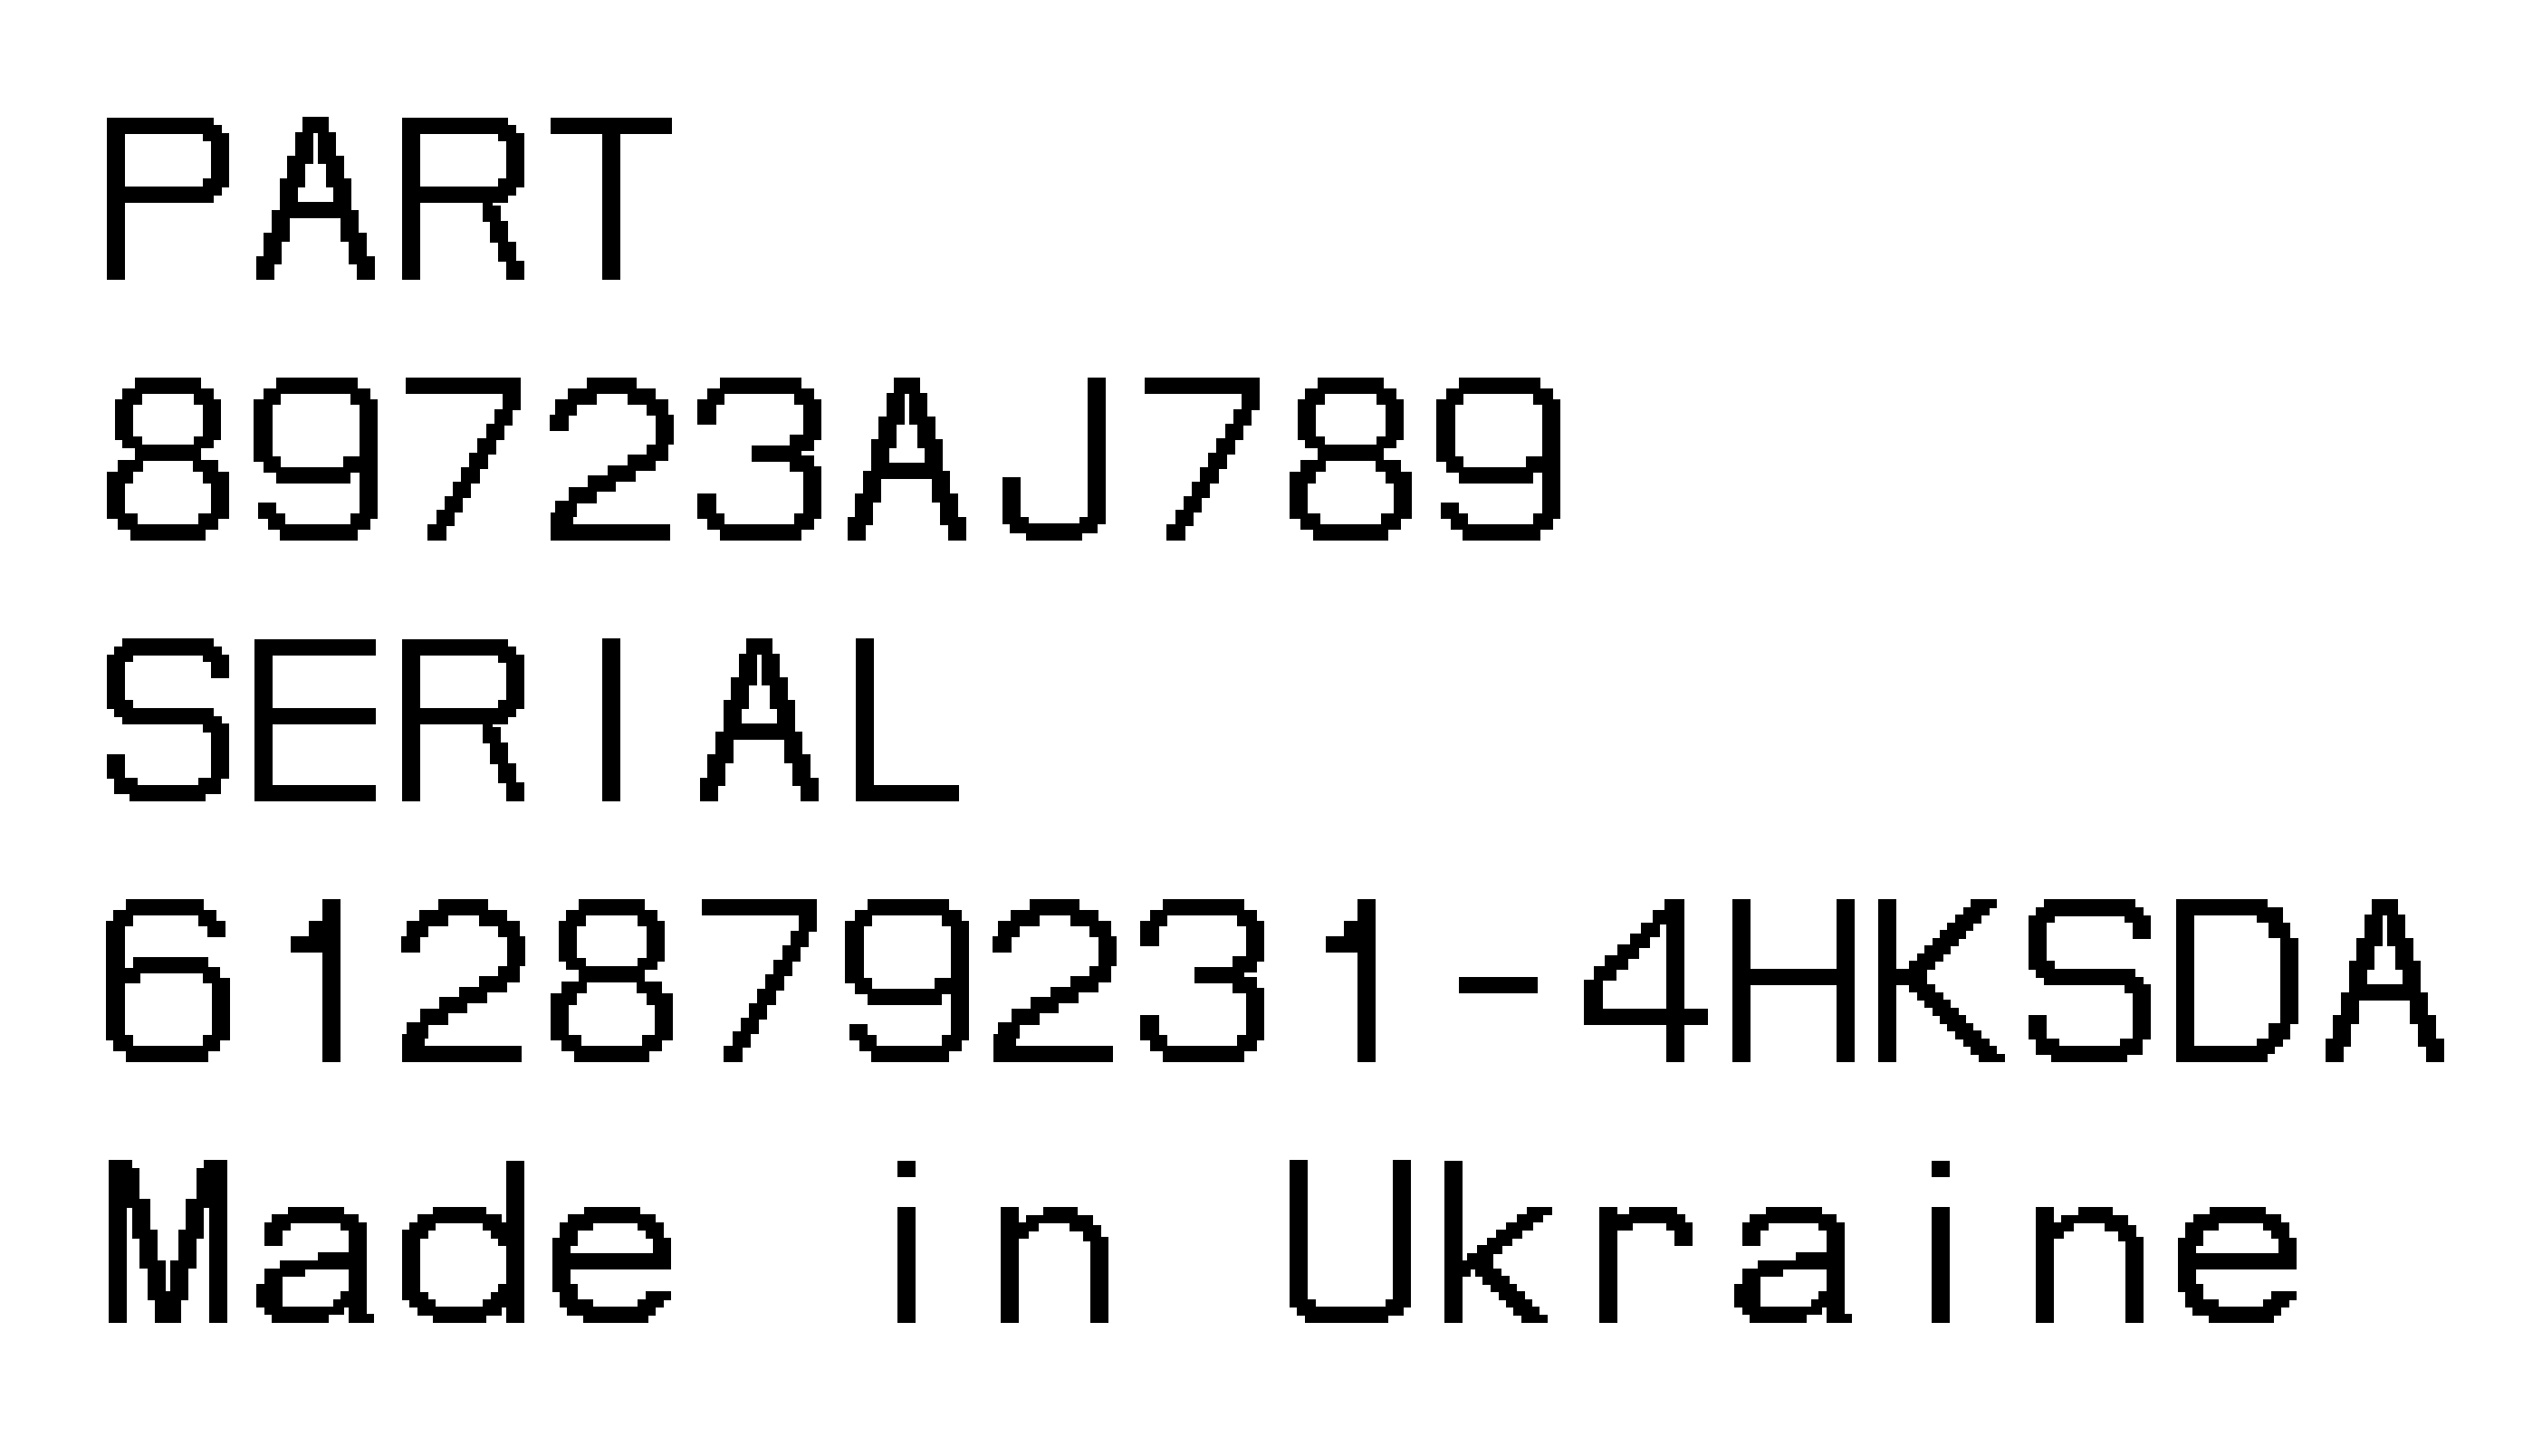 The font for printing labels